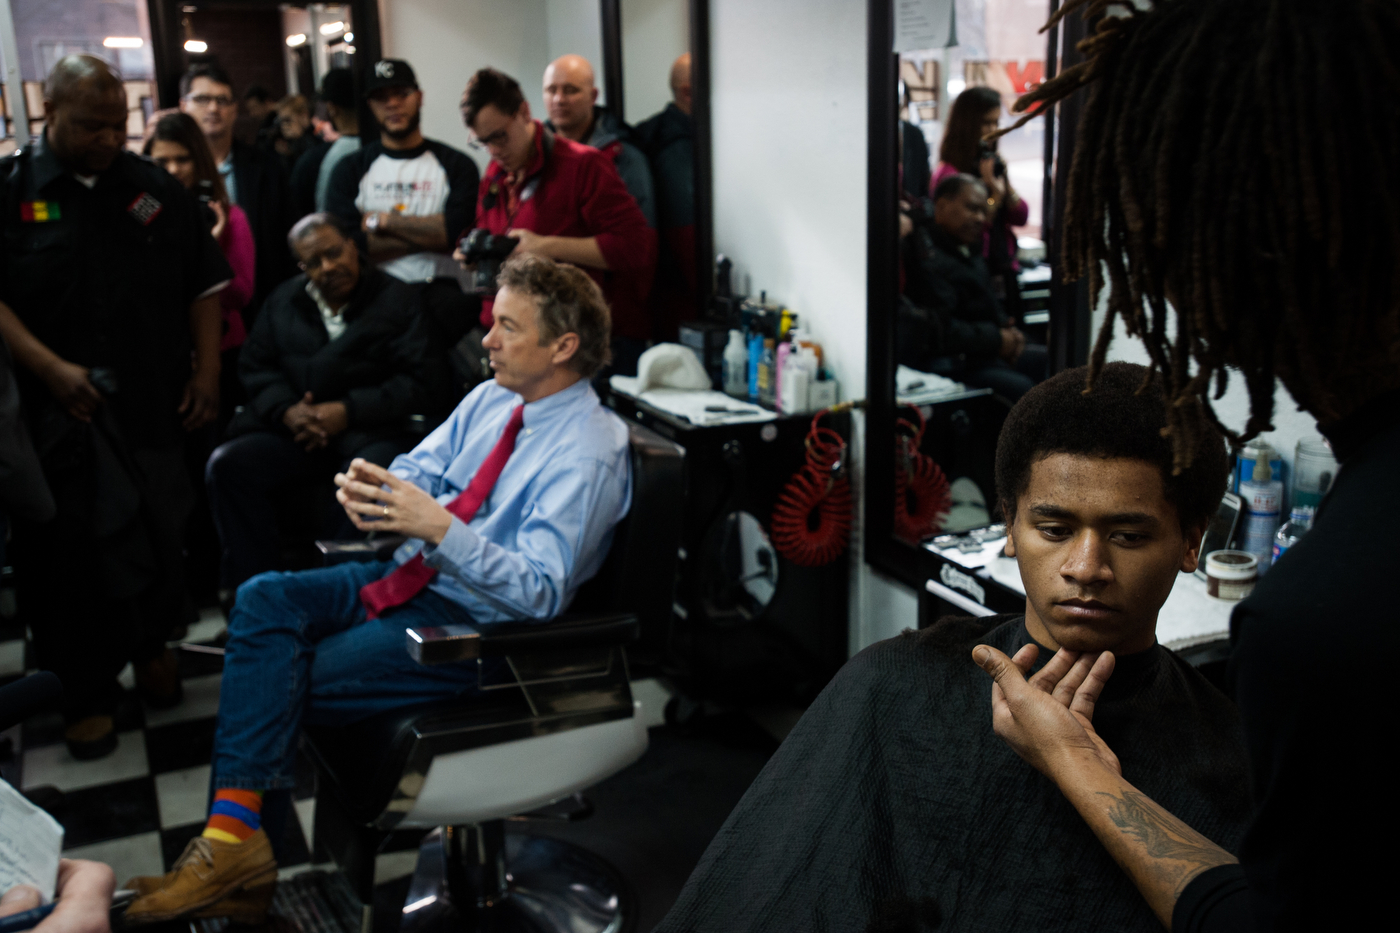  J.T. Kramer gets his hair cut as Republican U.S. presidential candidate Rand Paul holds a campaign event at Platinum Kutz barbershop in Des Moines, Iowa on January 18, 2016. 